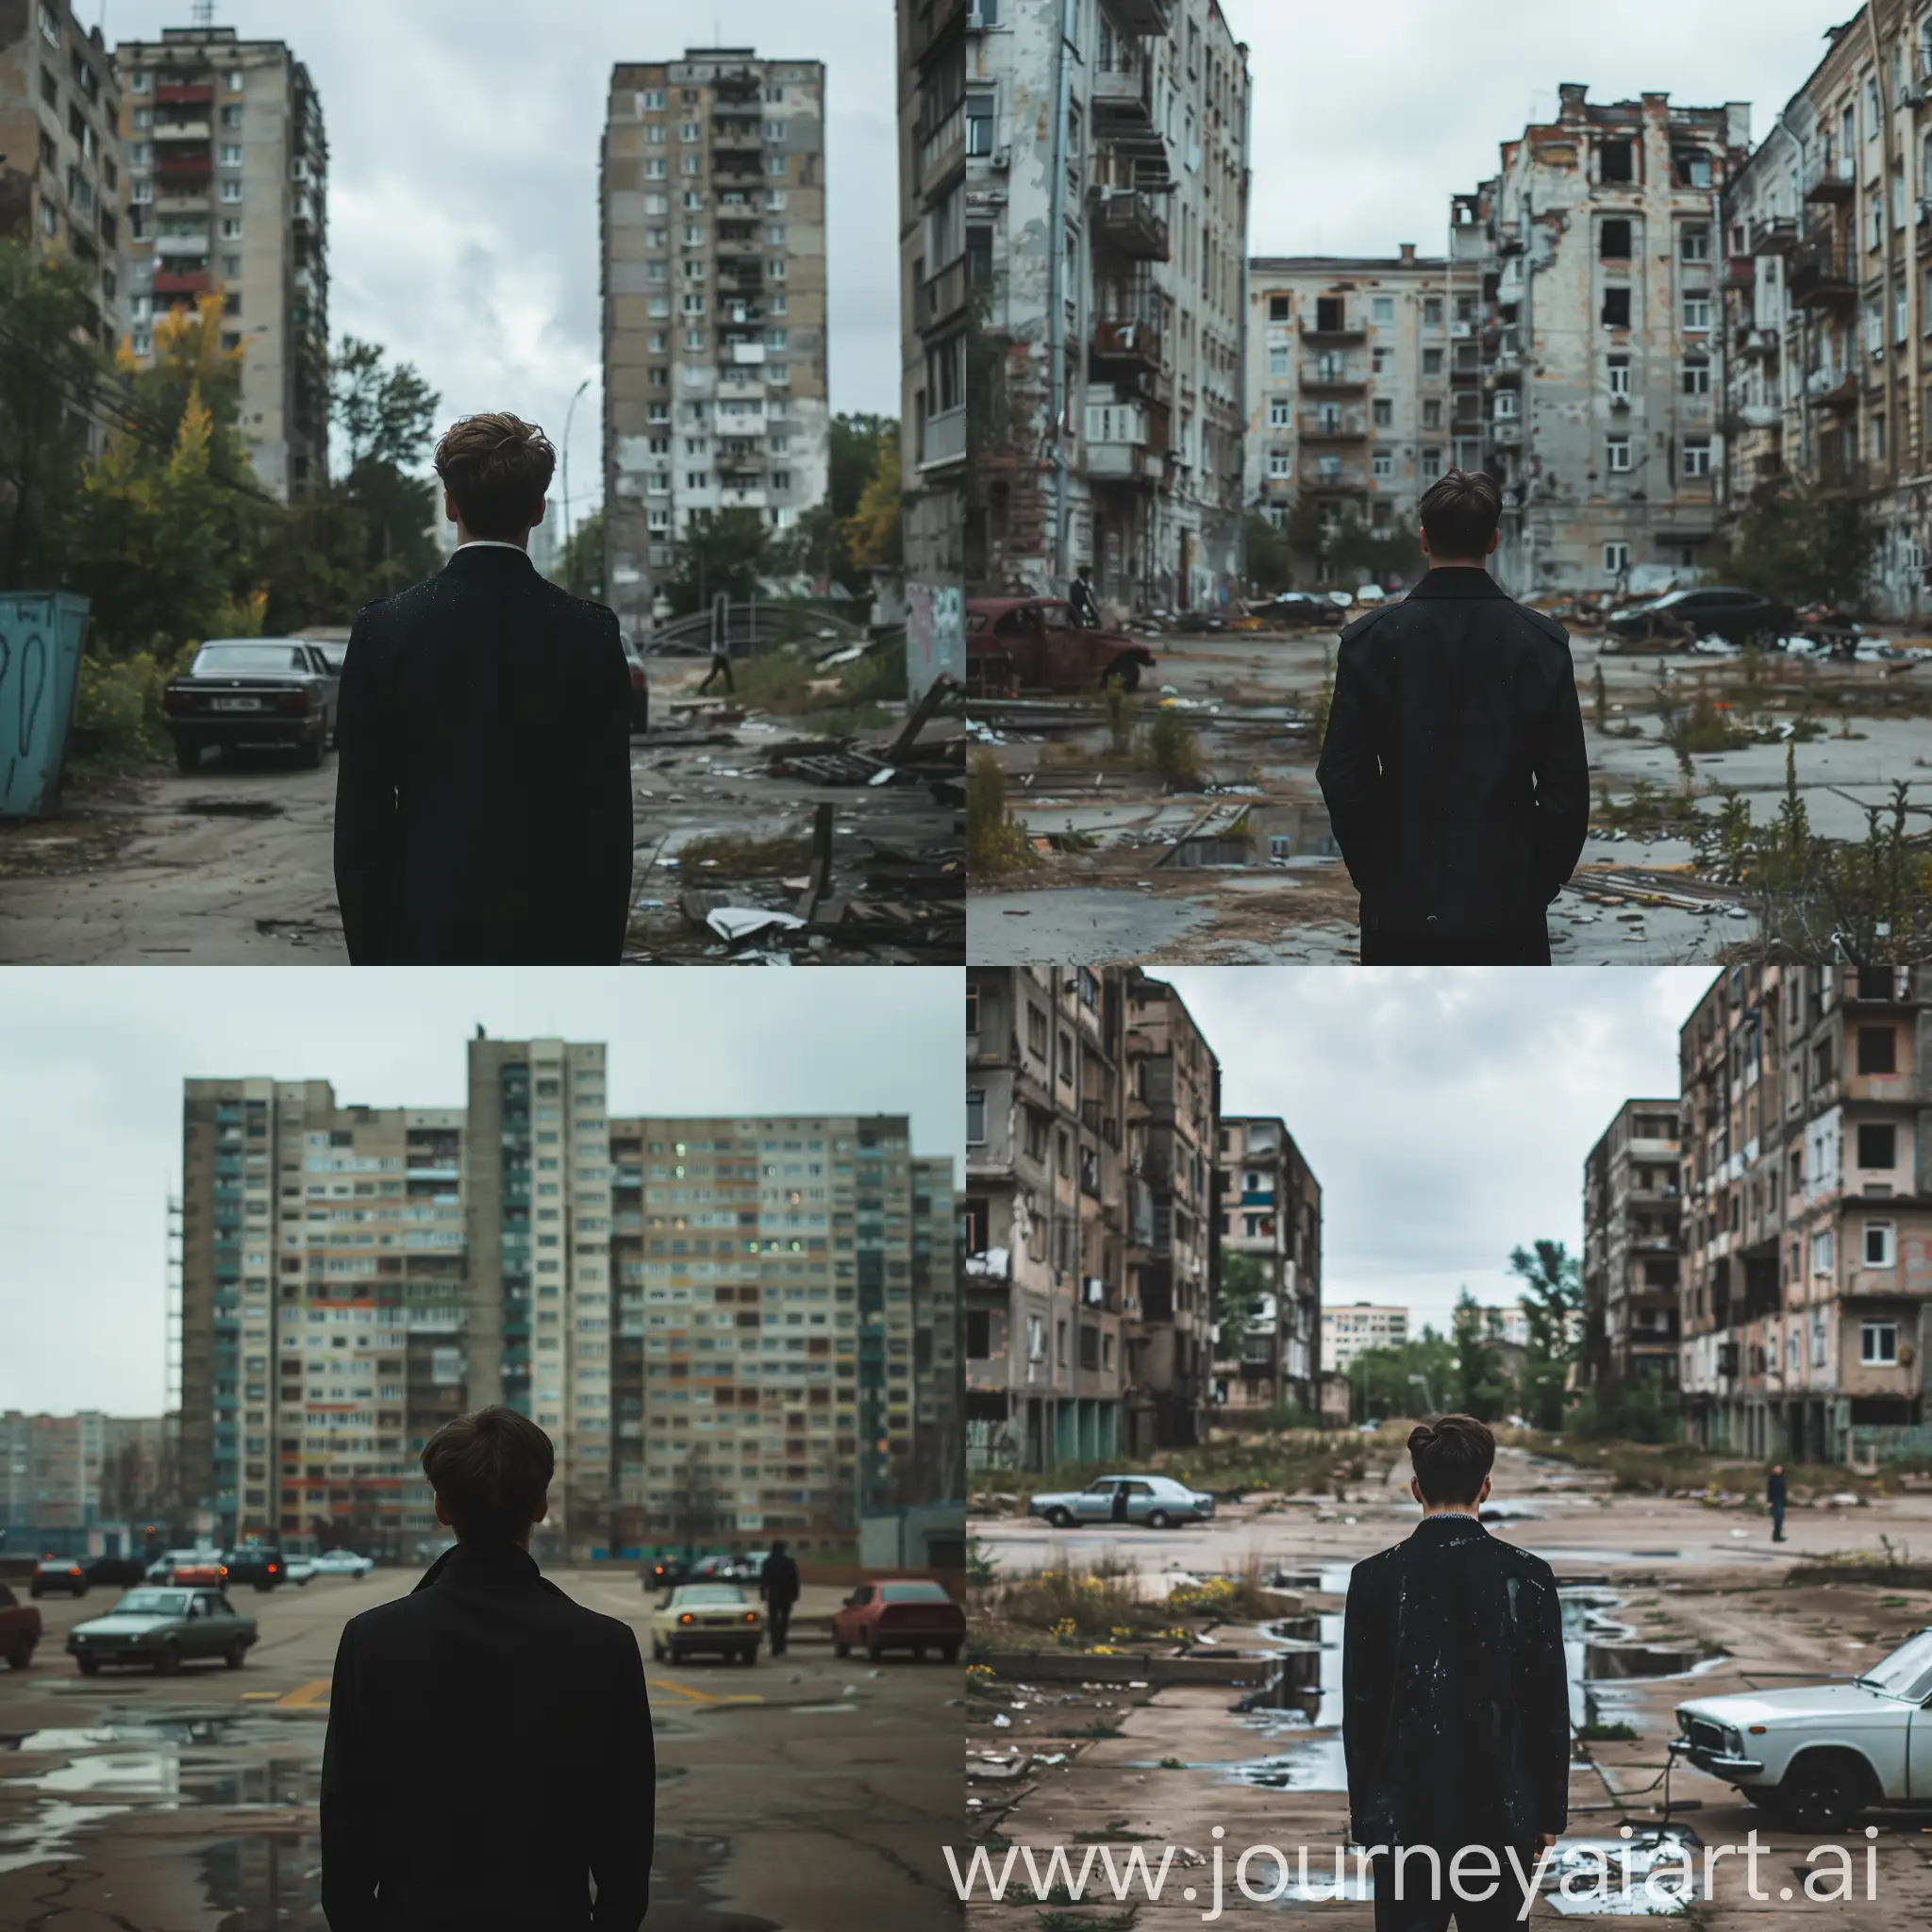 Gloomy-Soviet-Cityscape-with-a-Man-in-Classic-Black-Suit-High-Quality-4K-Stock-Photo